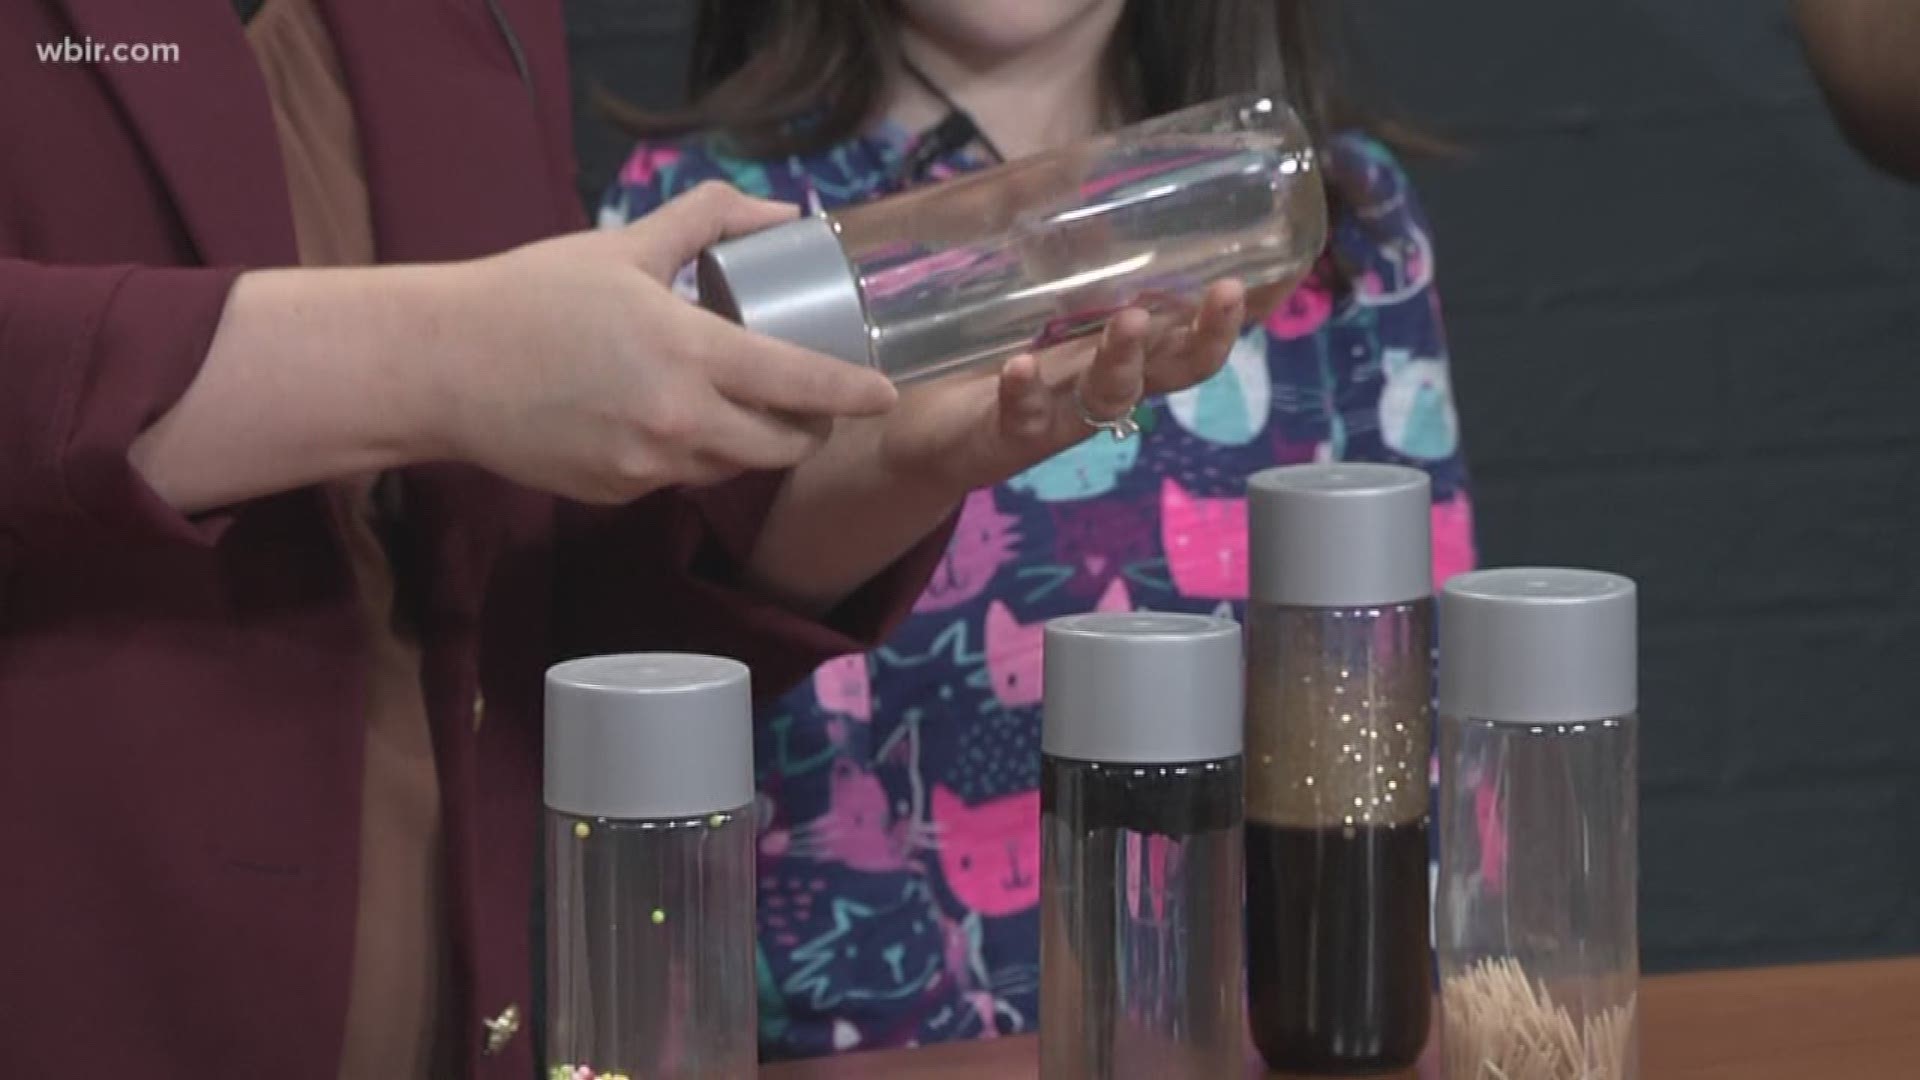 WonderWorks Pigeon Forge talks about do-it-yourself Sensory Bottles. They will host as "Sensory Night" event on Jan. 31, from 4 to 8pm. Cost is $10.  To learn more visit wonderworksonline.com. Jan 8, 2019